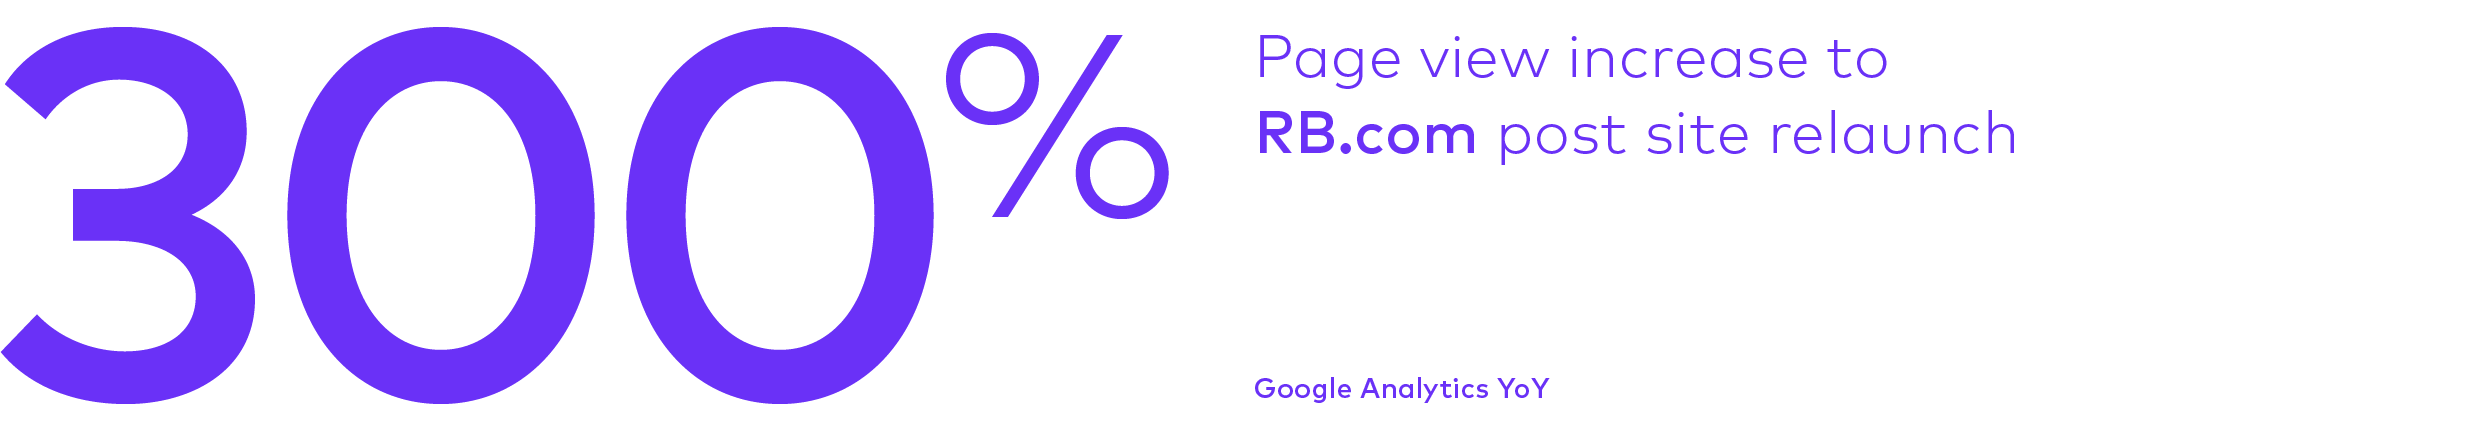 RB.com 3OO% page view uplift